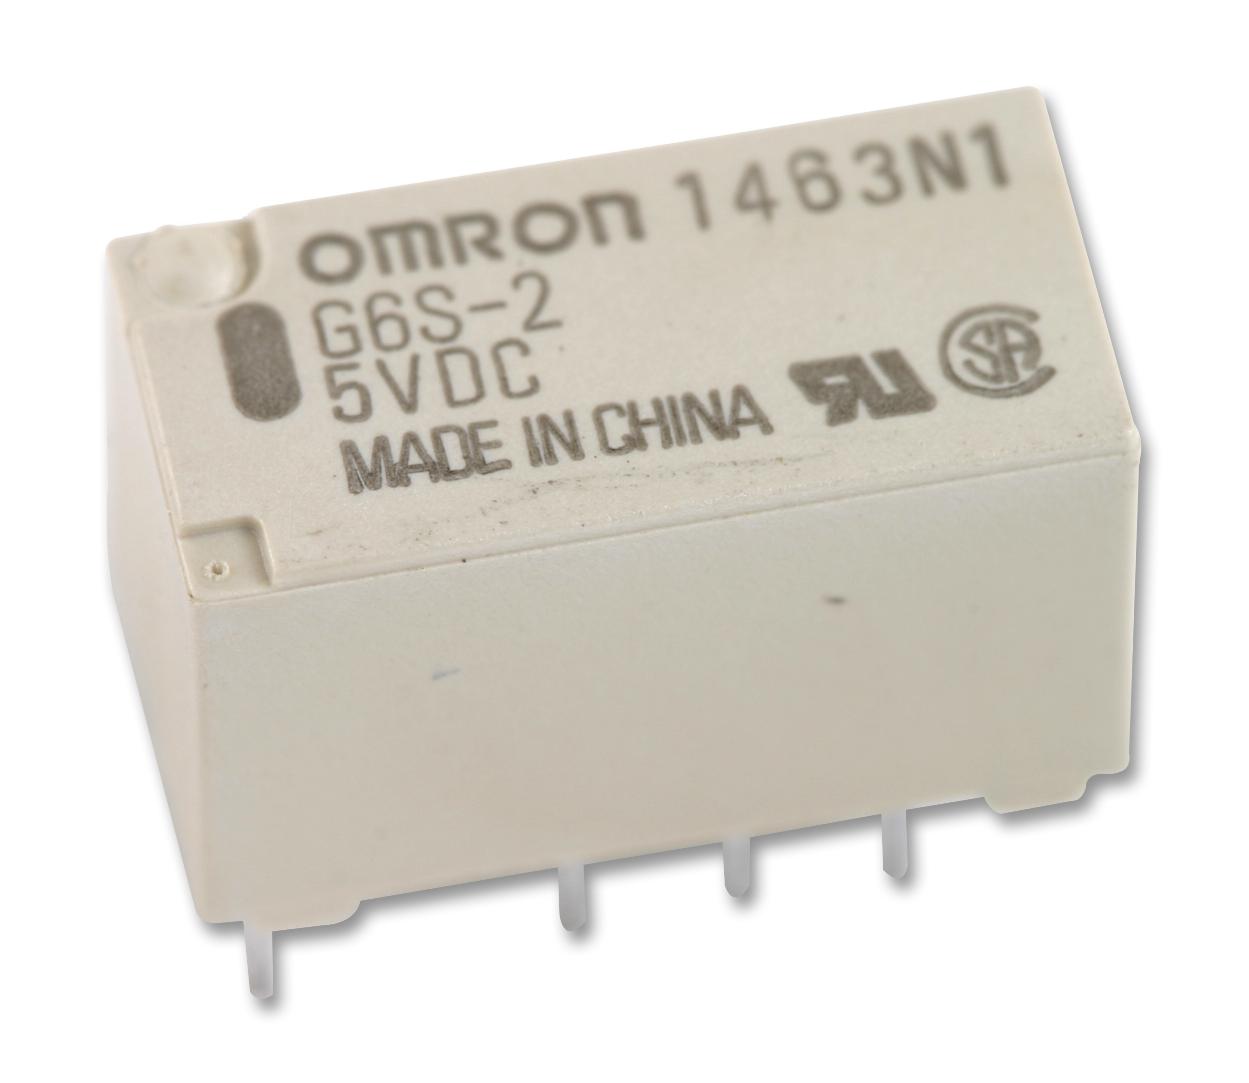 G6S-2 4 DC5 RELAY, SIGNAL, DPDT, 30VDC, 2A OMRON